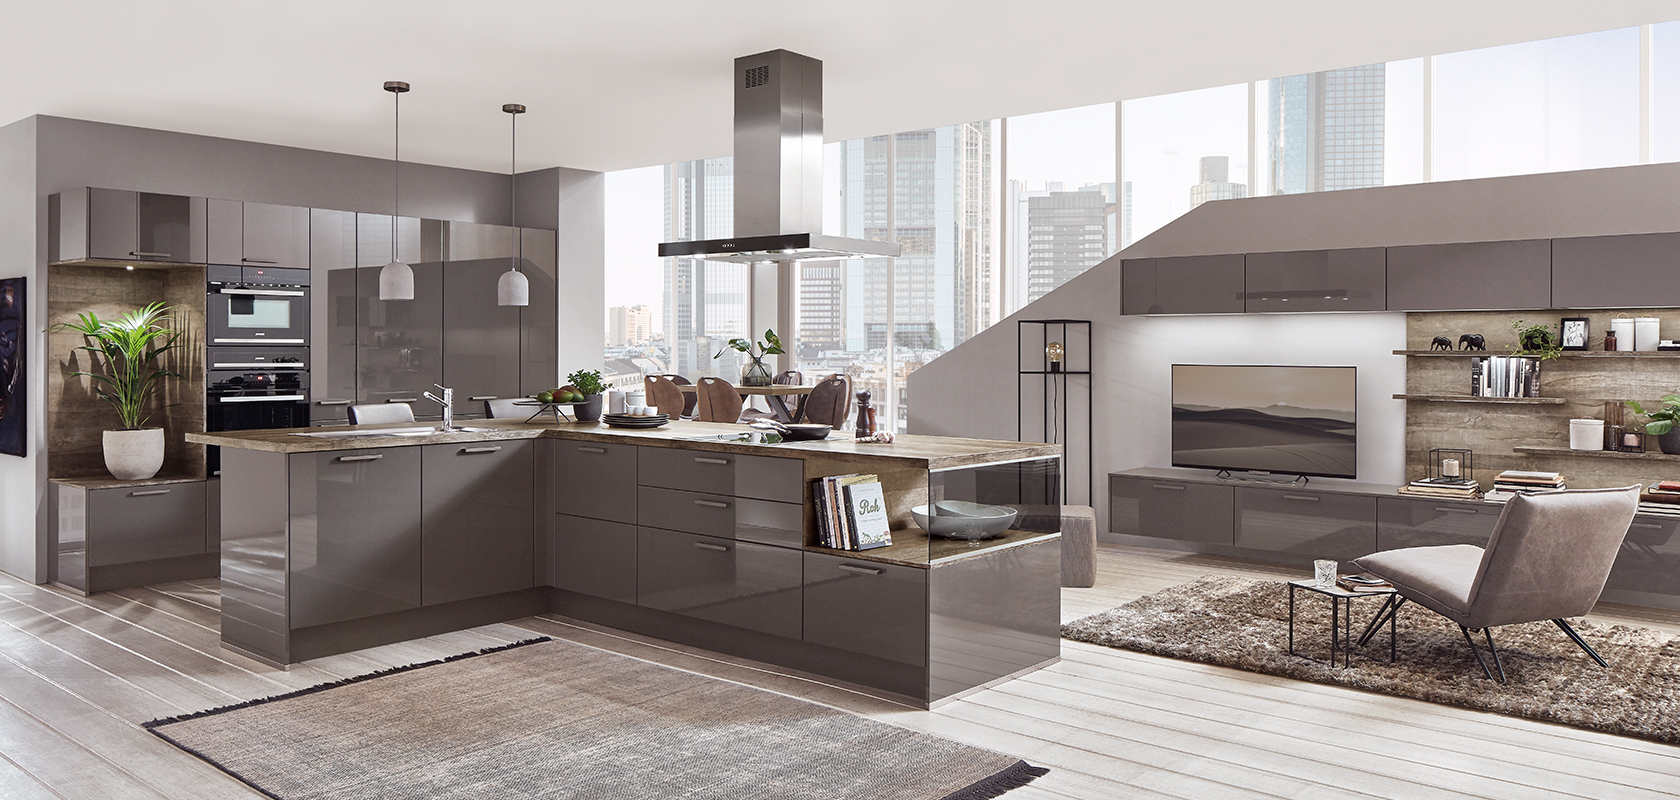 Sleek modern kitchen with integrated appliances and a matching living area, featuring cityscape views through large windows, blending functionality and style.